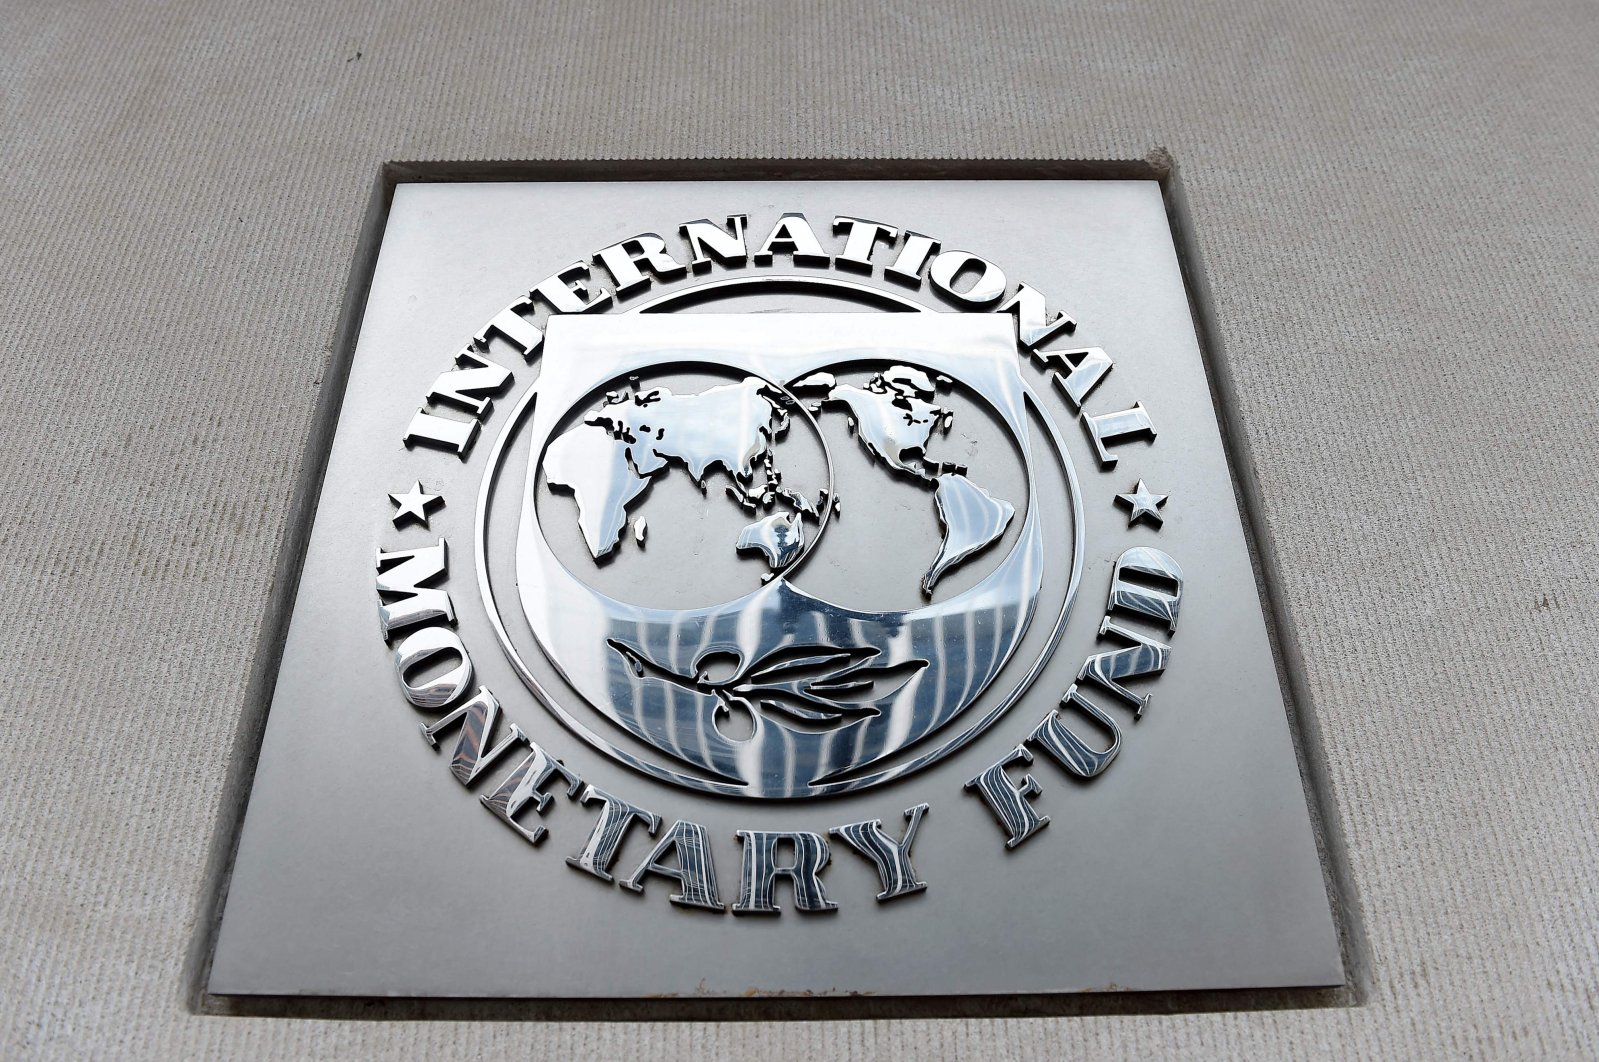 An exterior view of the building of the International Monetary Fund (IMF) is seen in Washington, D.C., U.S., March 27, 2020. (AFP Photo)